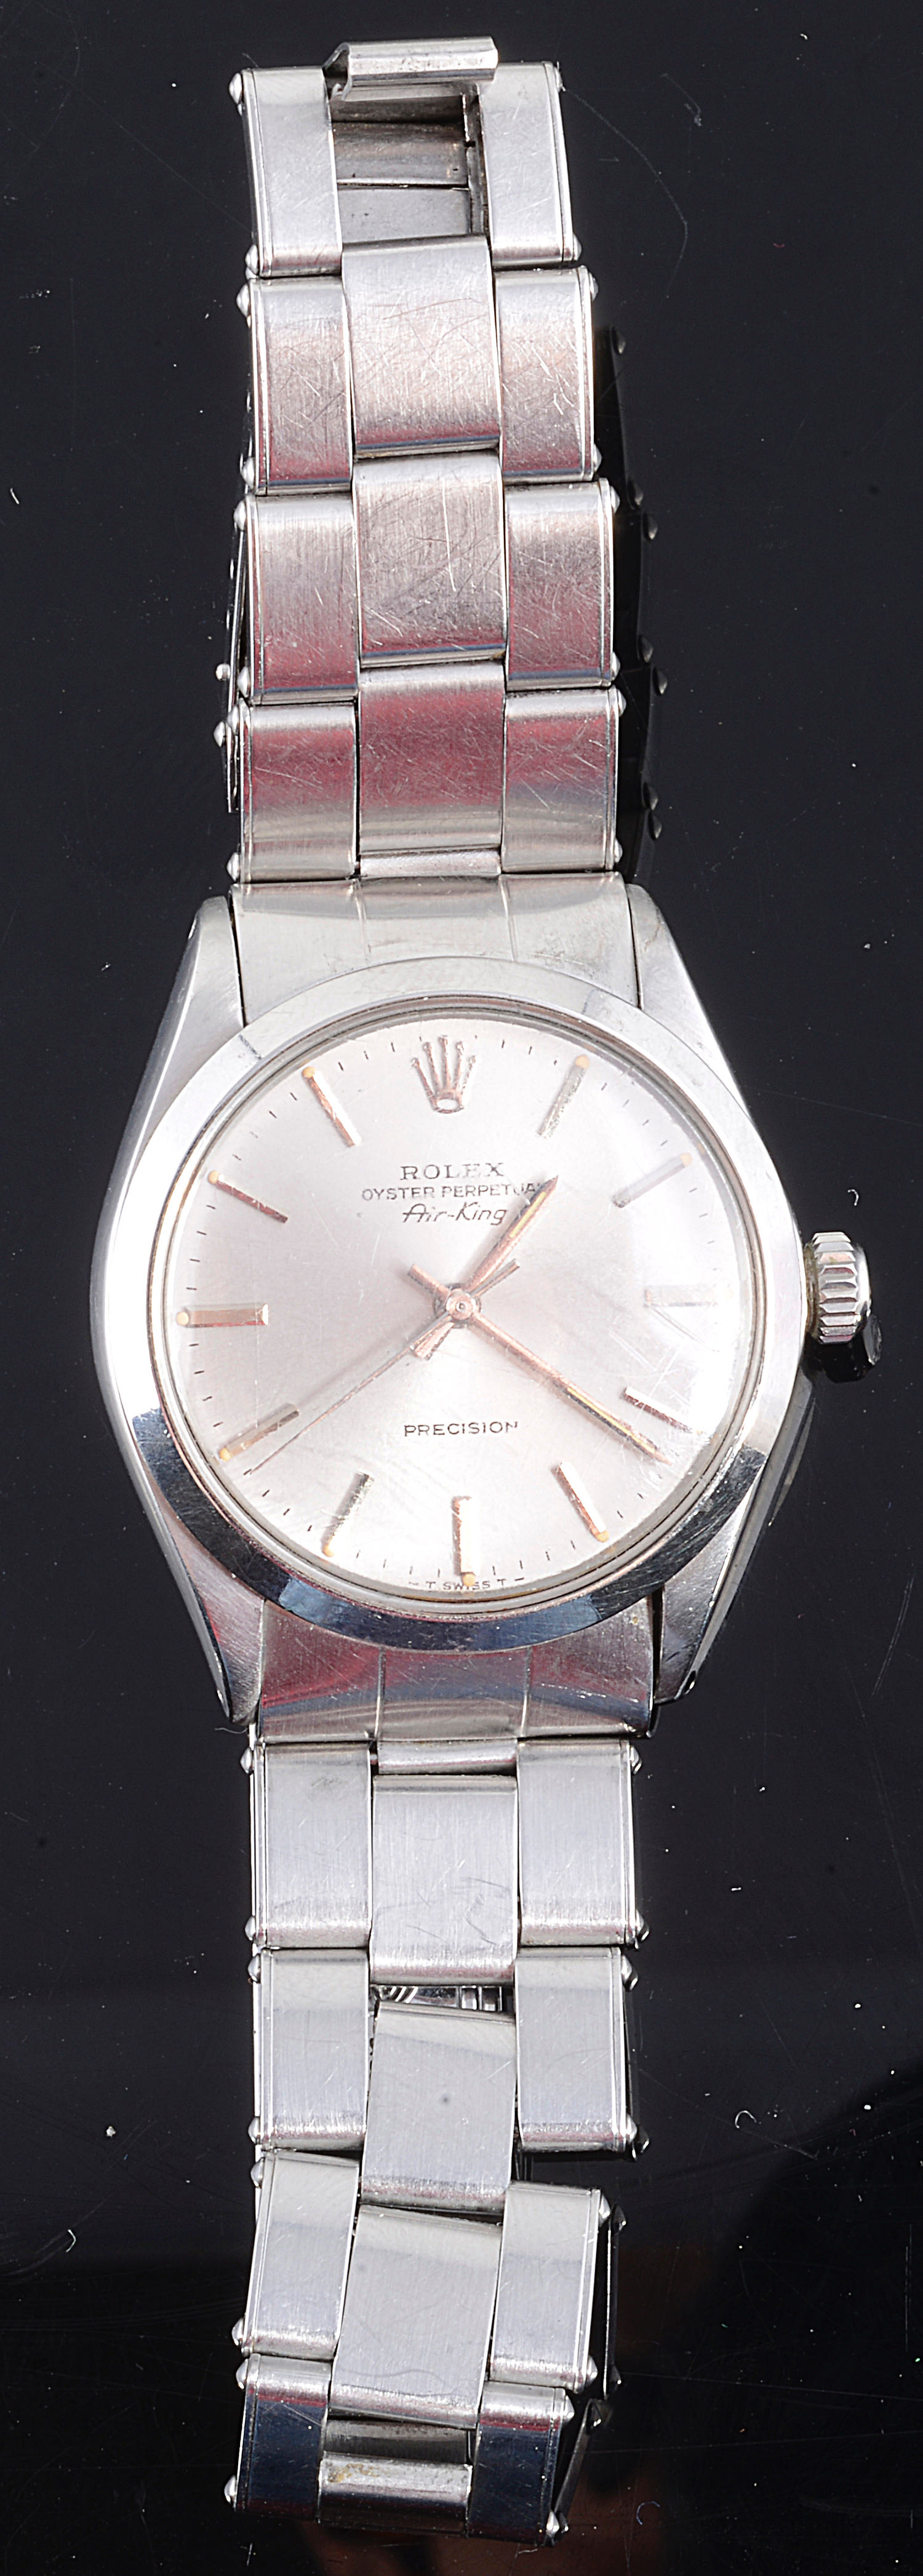 A Gentleman's Rolex Oyster Perpetual Air King Precision stainless steel wristwatch c.1970 - Image 2 of 3